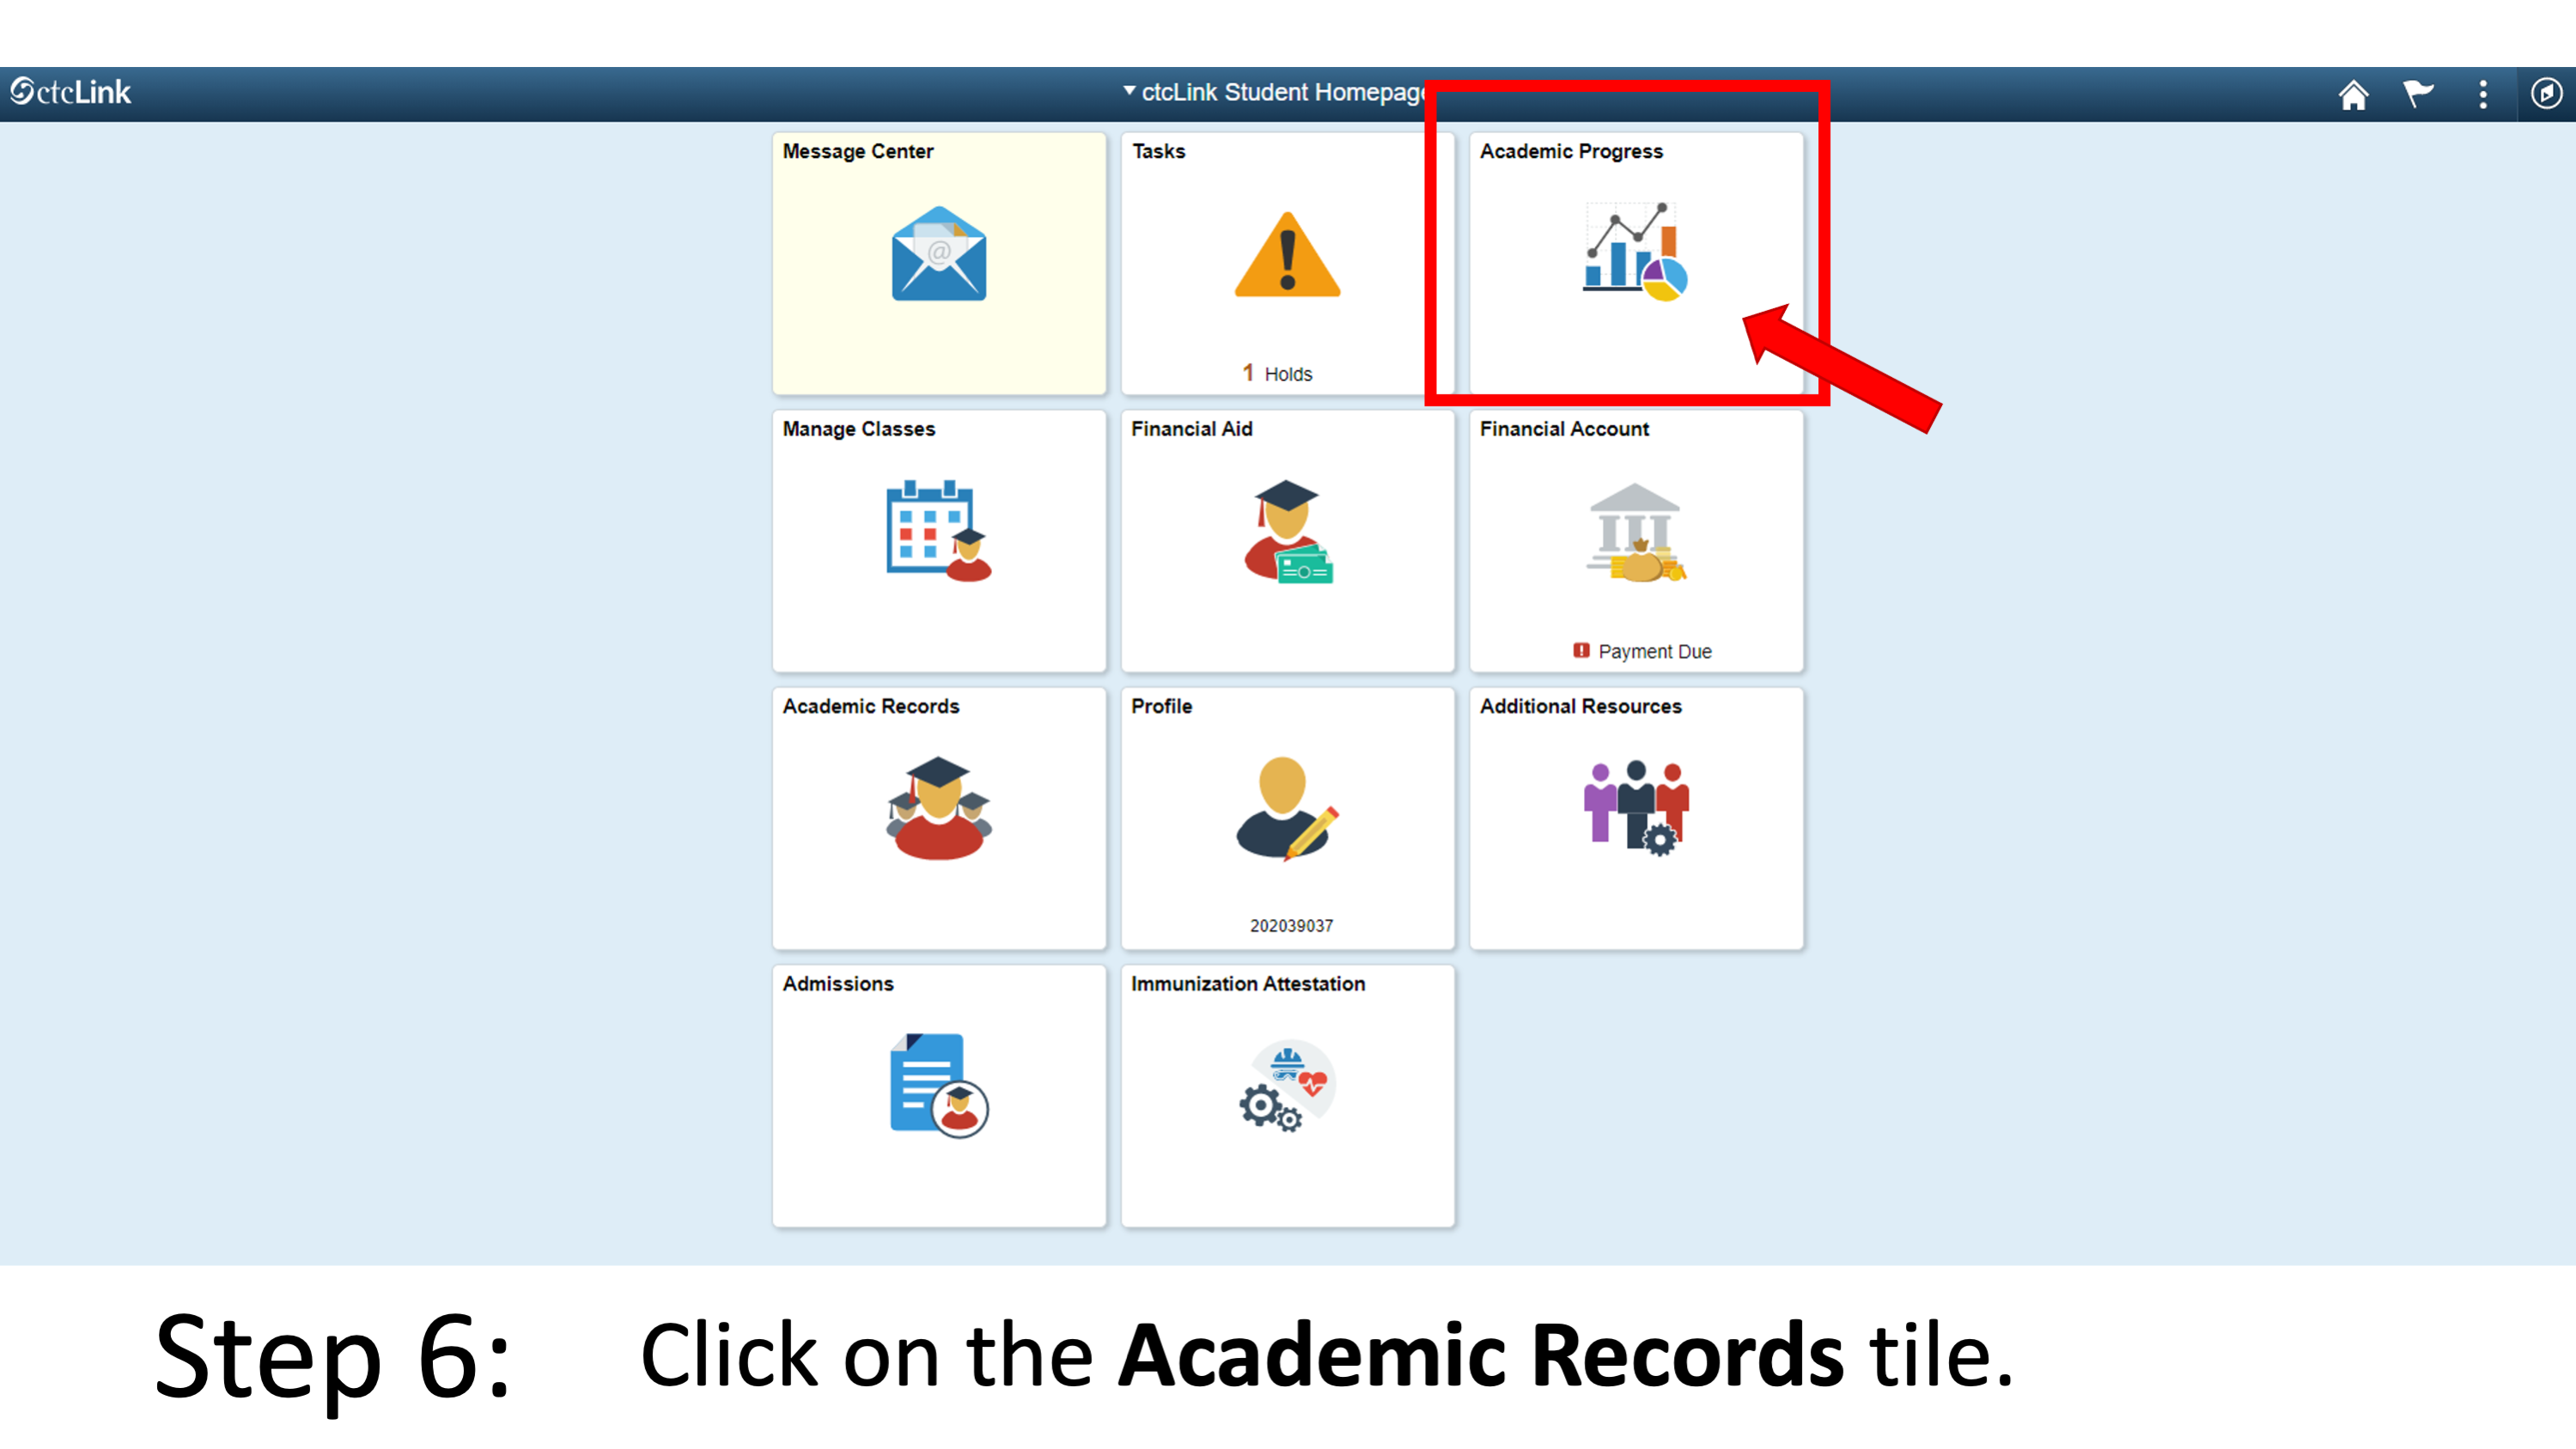 Step 6: Click on the Academic Records tile.